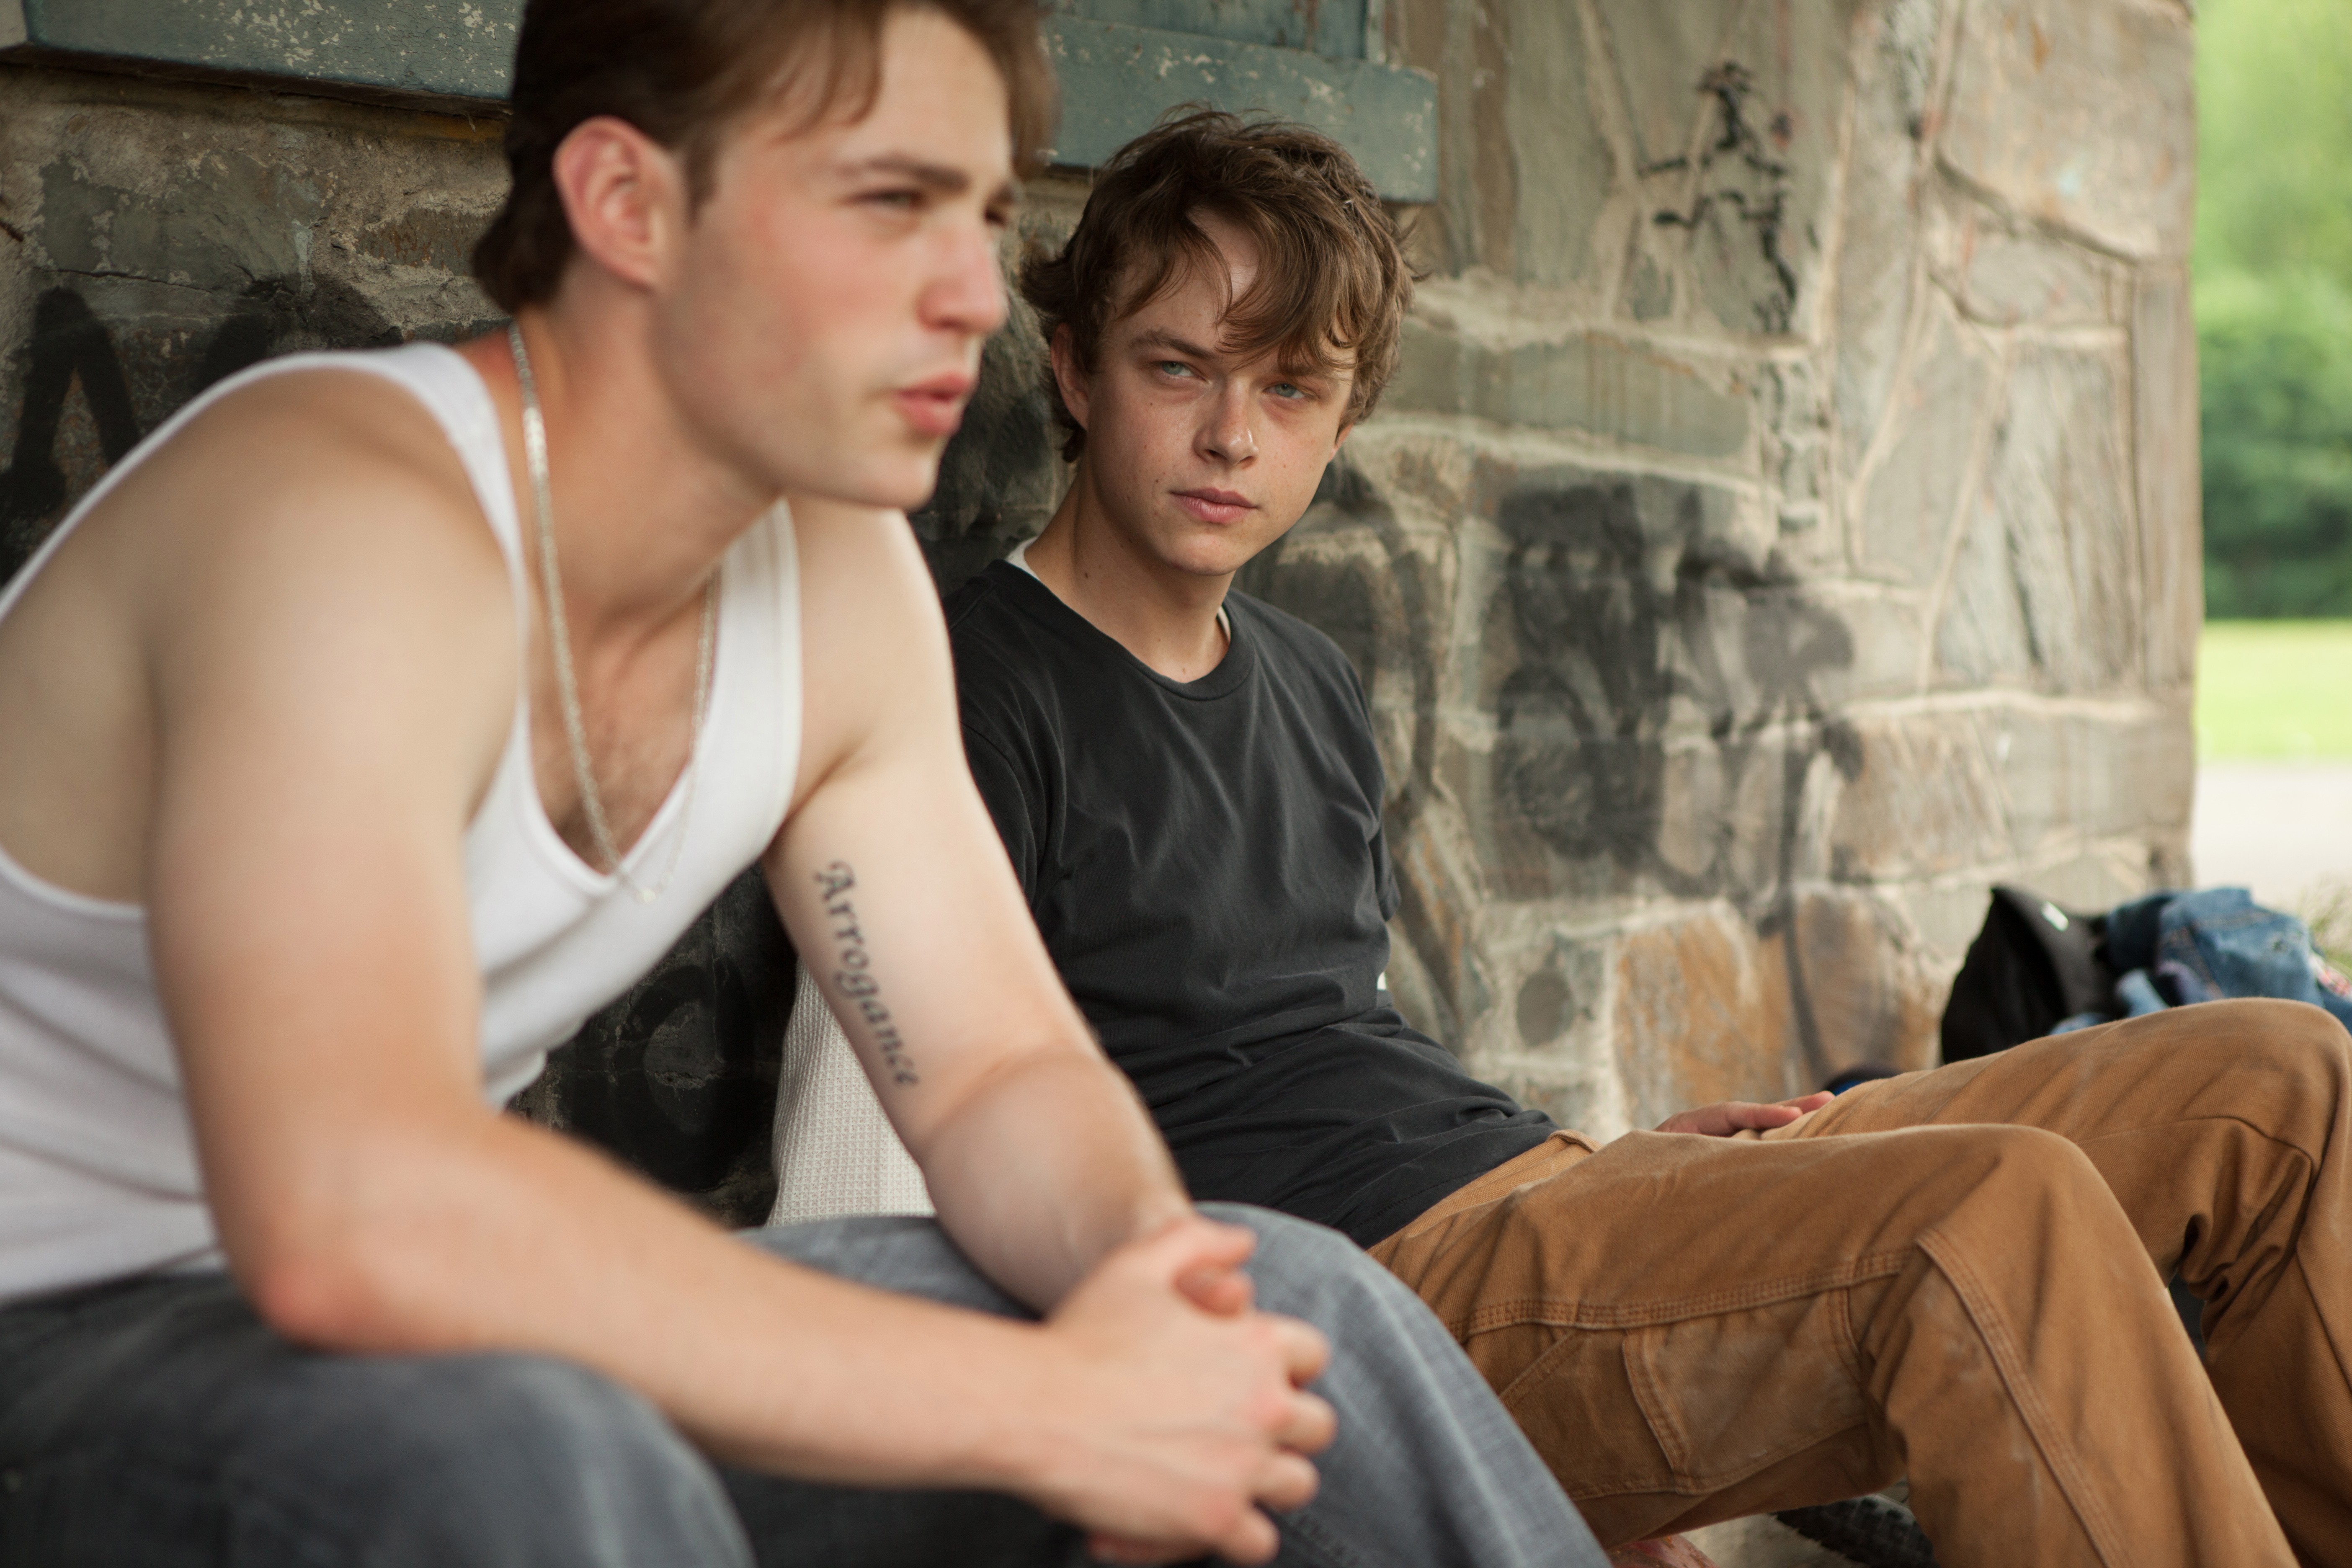 movie, the place beyond the pines, aj (the place beyond the pines), dane dehaan, emory cohen, jason (the place beyond the pines)